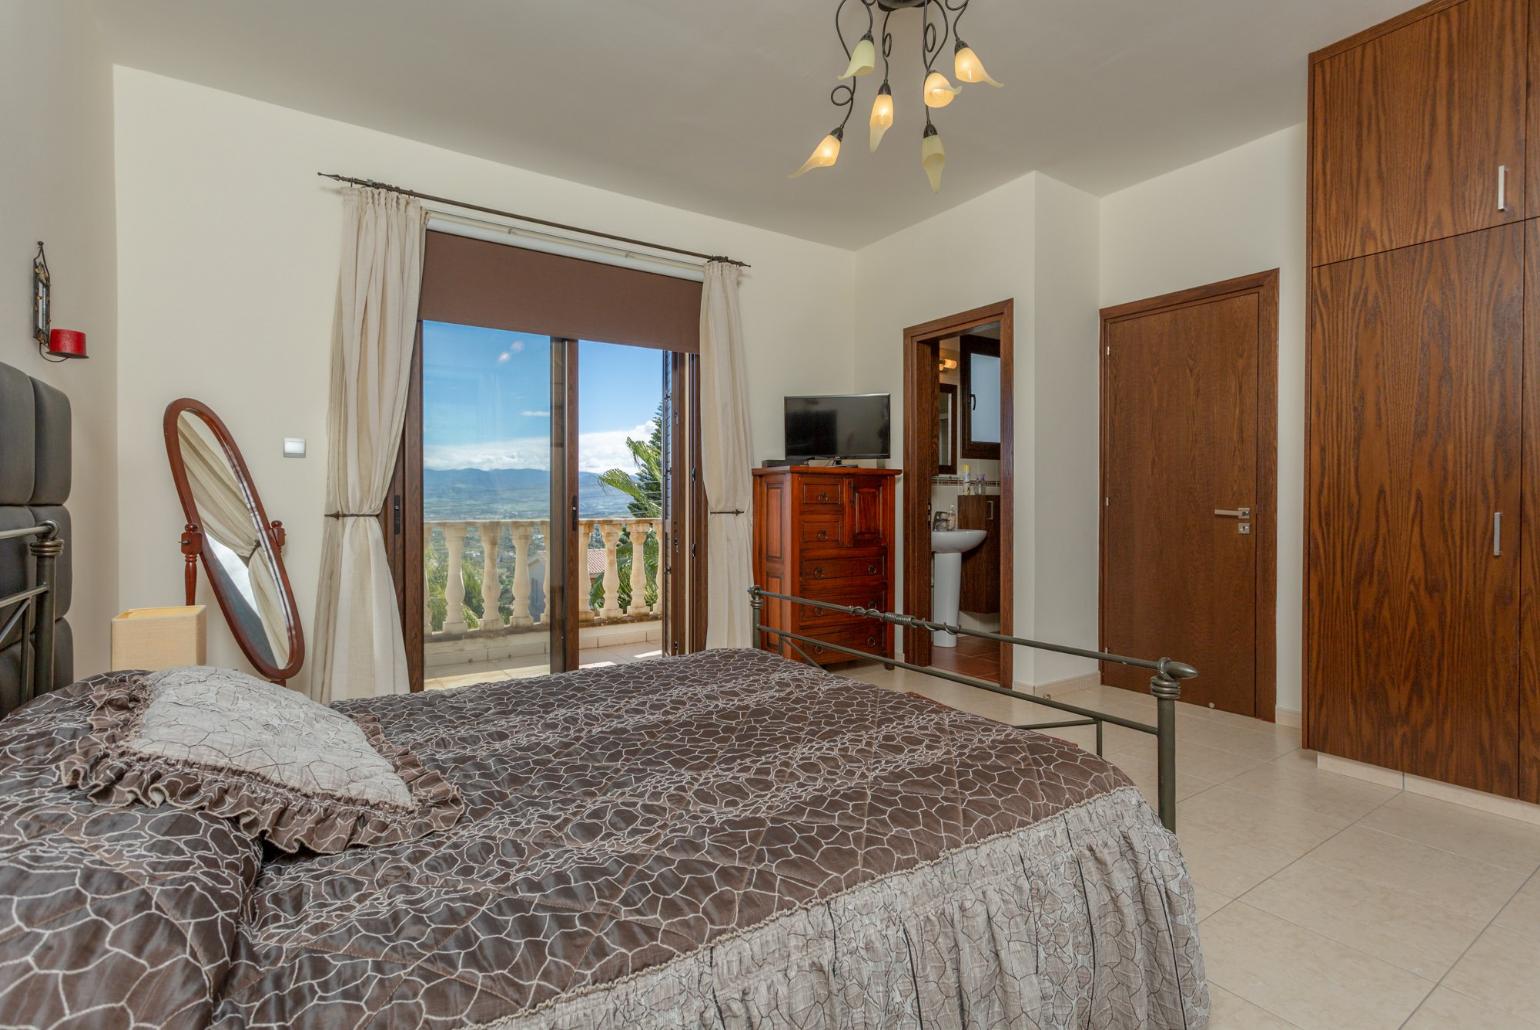 Double bedroom with en suite bathroom, A/C, TV, and balcony access with sea views